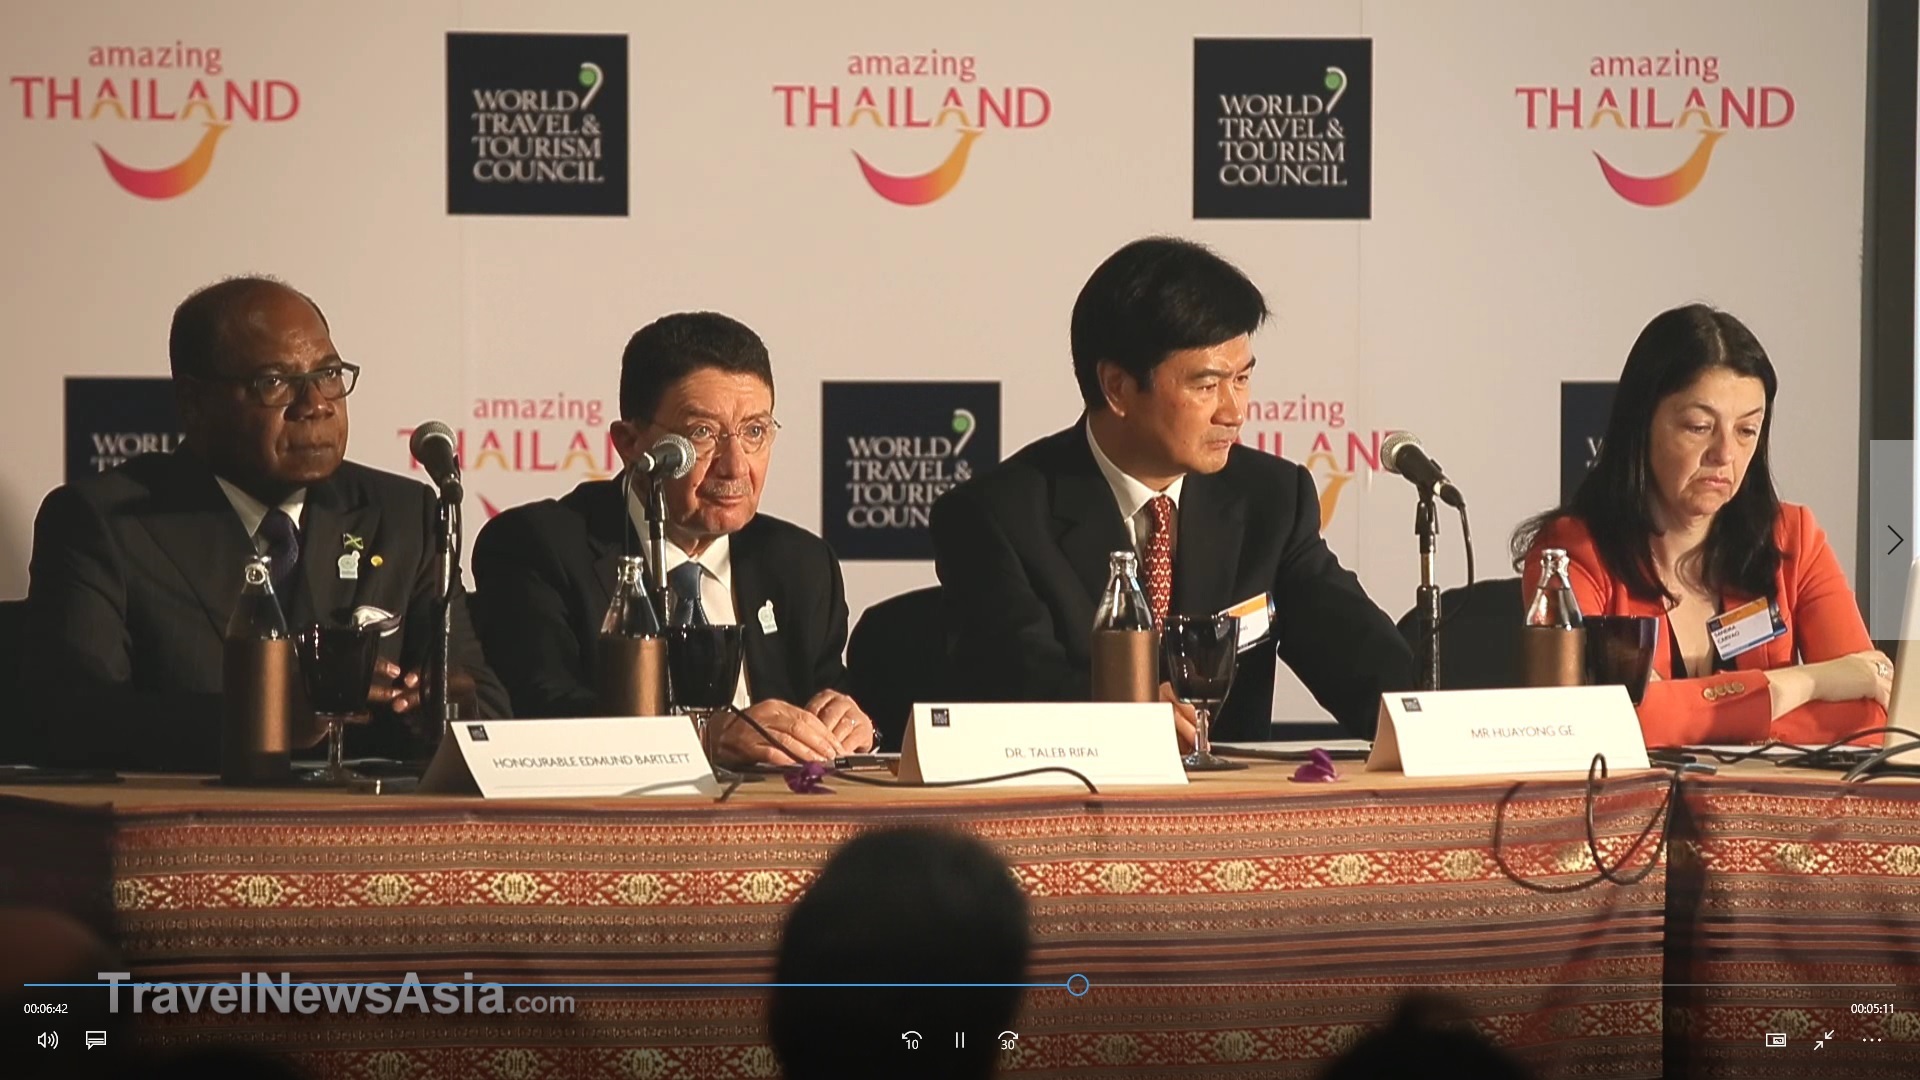 Dr. Taleb Rifai, Secretary General of the UNWTO, was joined by the CEO of Union Pay, Mr GE Huayong, and Jamaica's Minister of Tourism, the Honourable Edmund Bartlett at the opening press conference of the WTTC Global Summit 2017 in Bangkok on Wednesday, 26 April 2017.